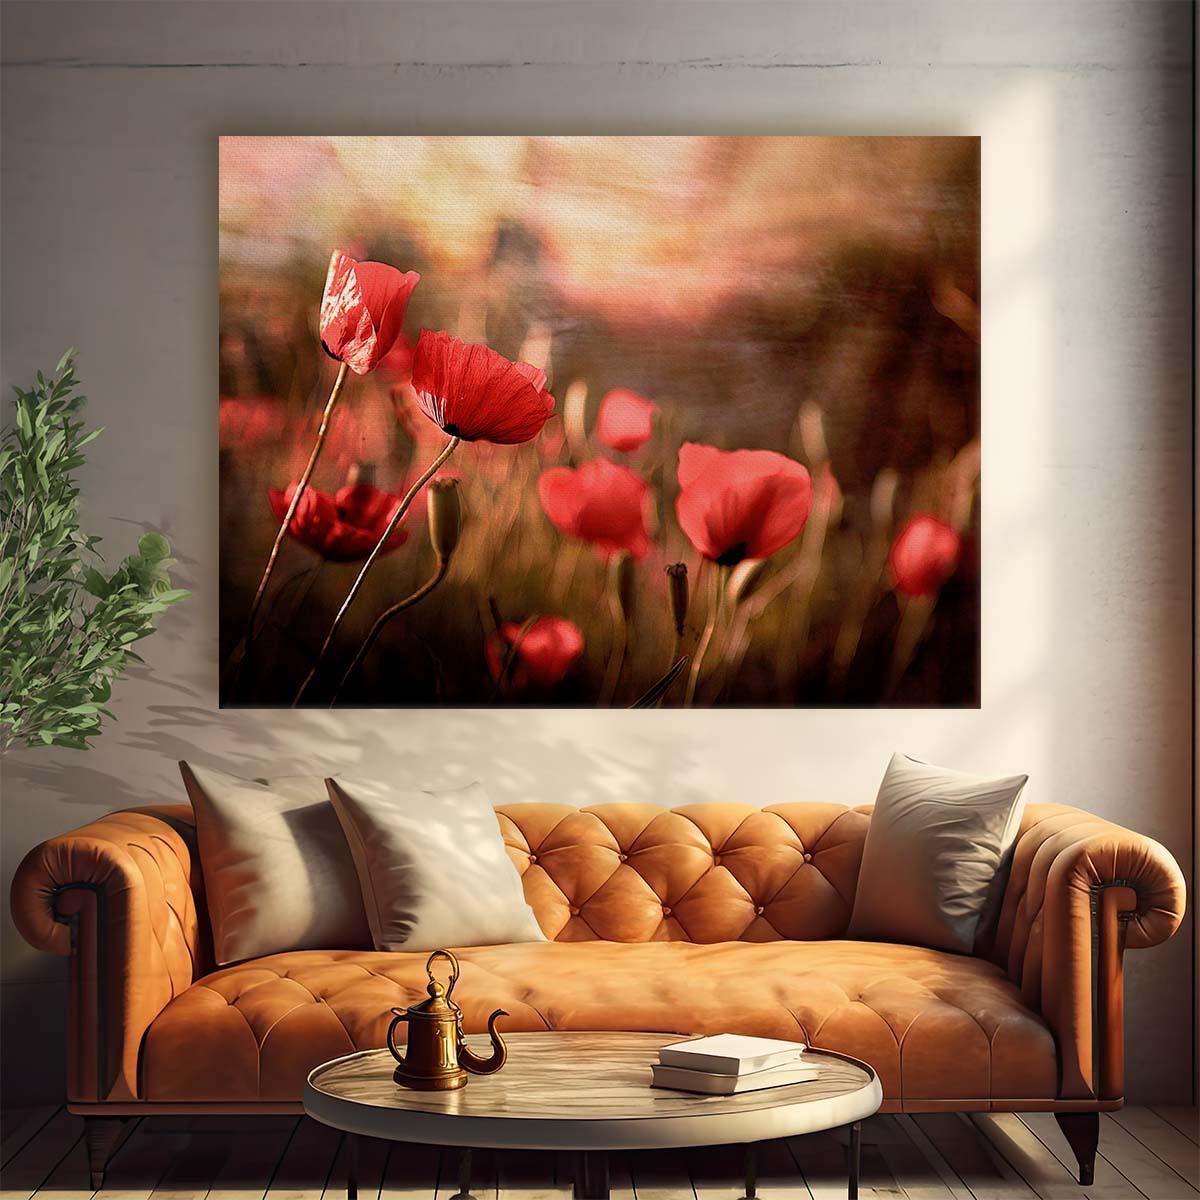 Romantic Red Poppy Sunrise Meadow Wall Art by Luxuriance Designs. Made in USA.